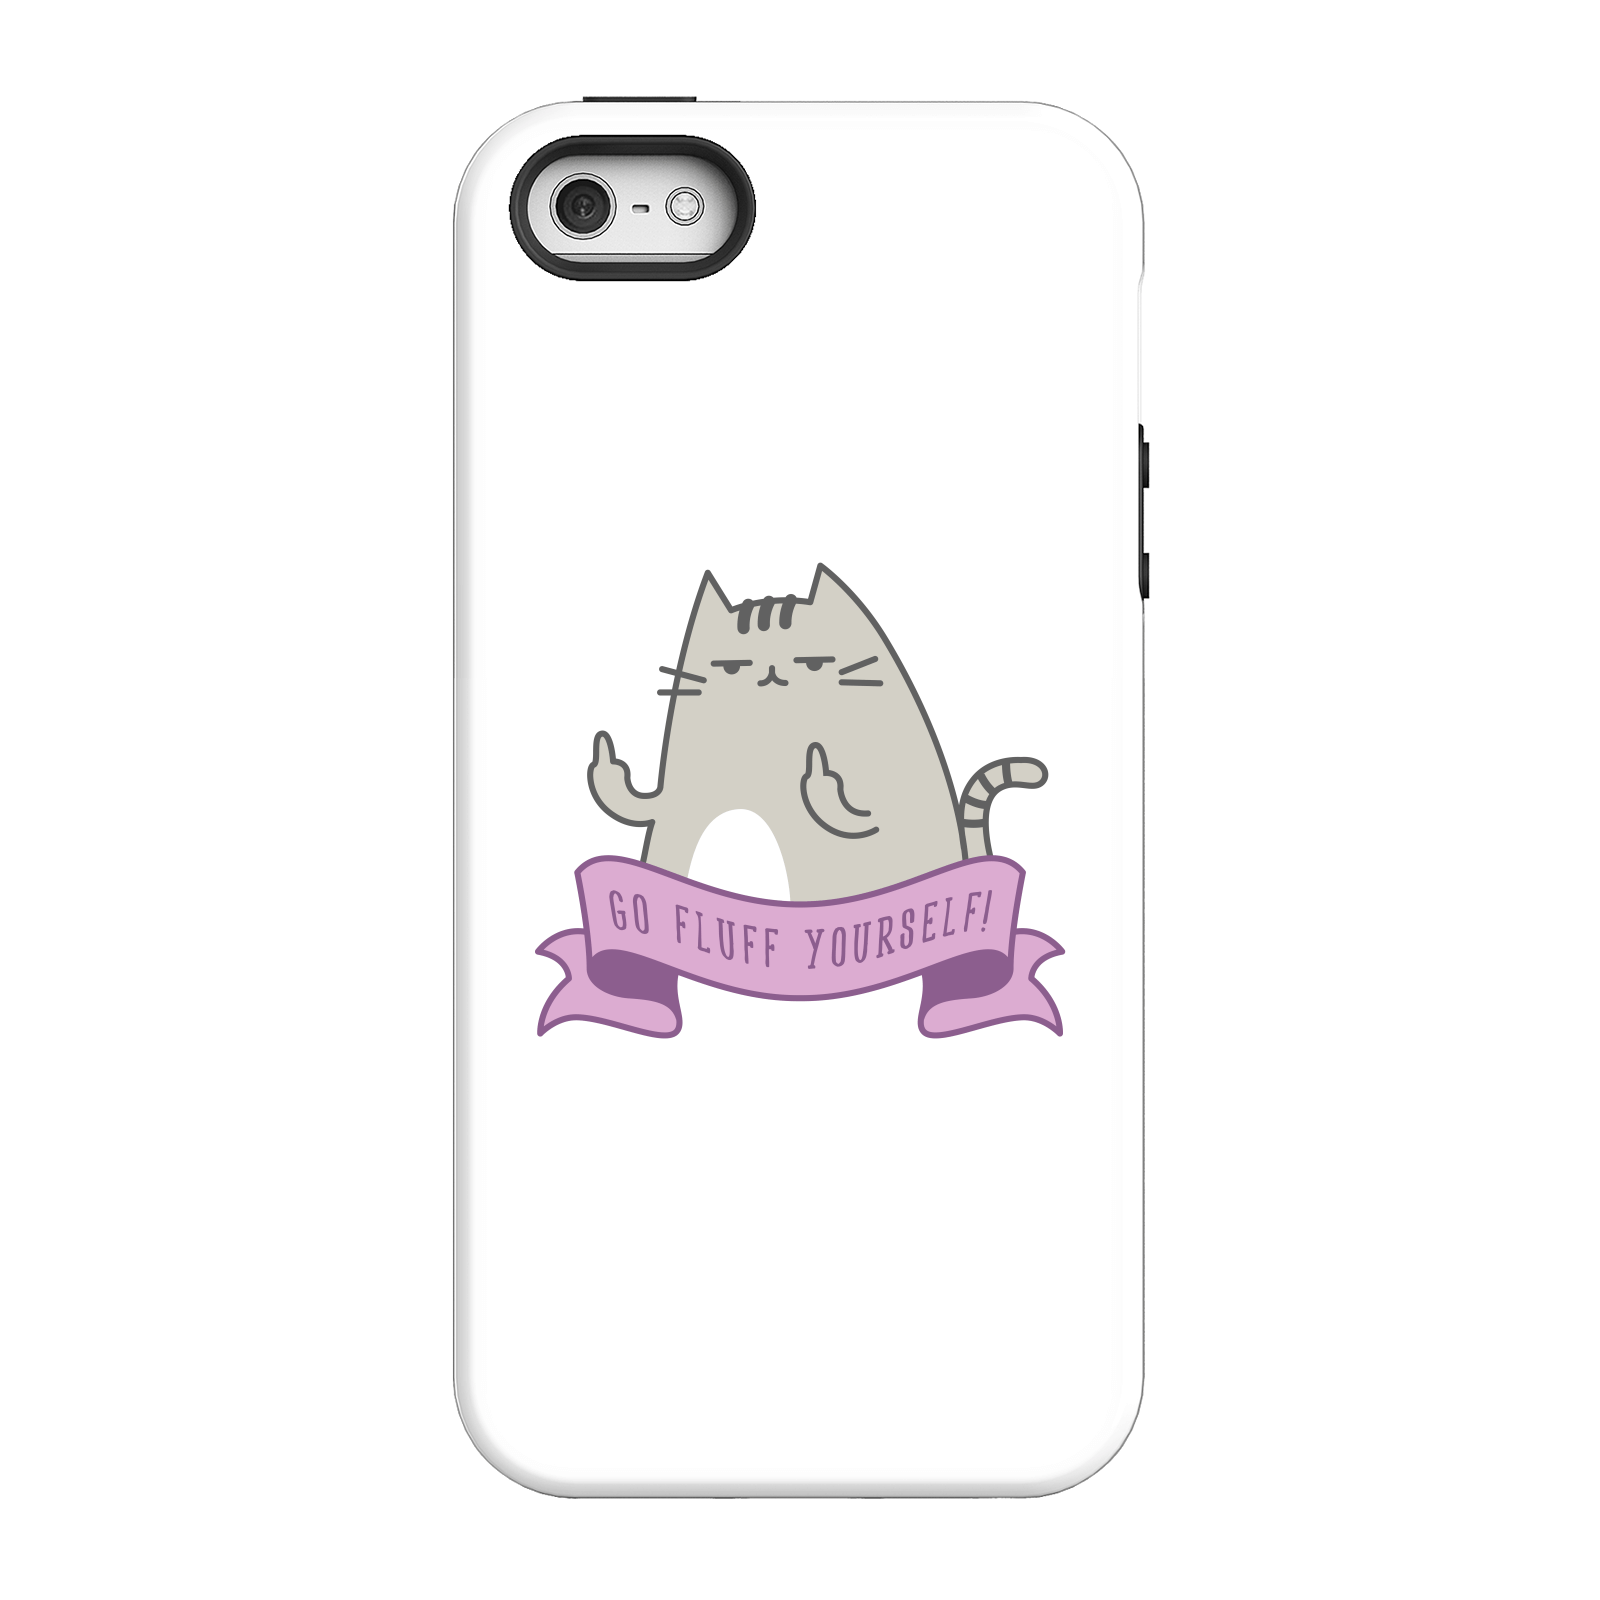 Go Fluff Yourself! Phone Case for iPhone and Android - iPhone 5/5s - Tough Case - Matte